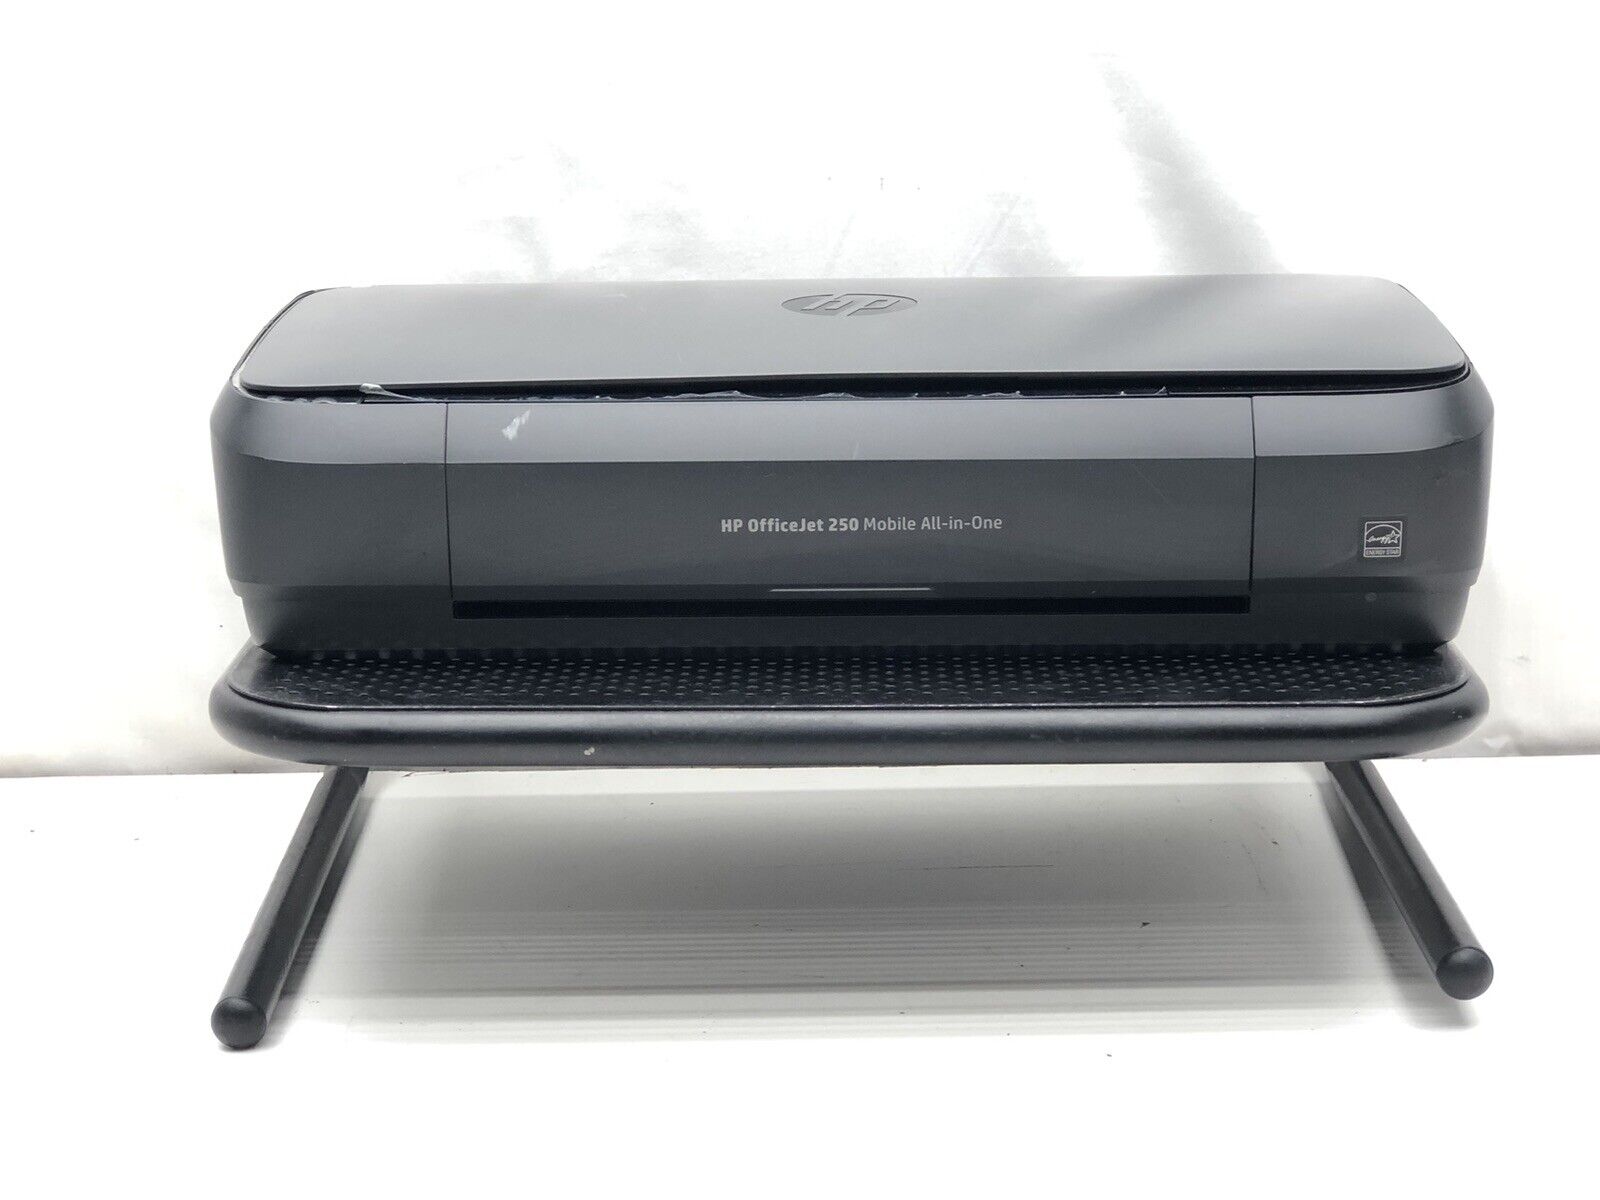 HP OfficeJet 250 All-in-One Portable Printer - the prenter need to get new toner